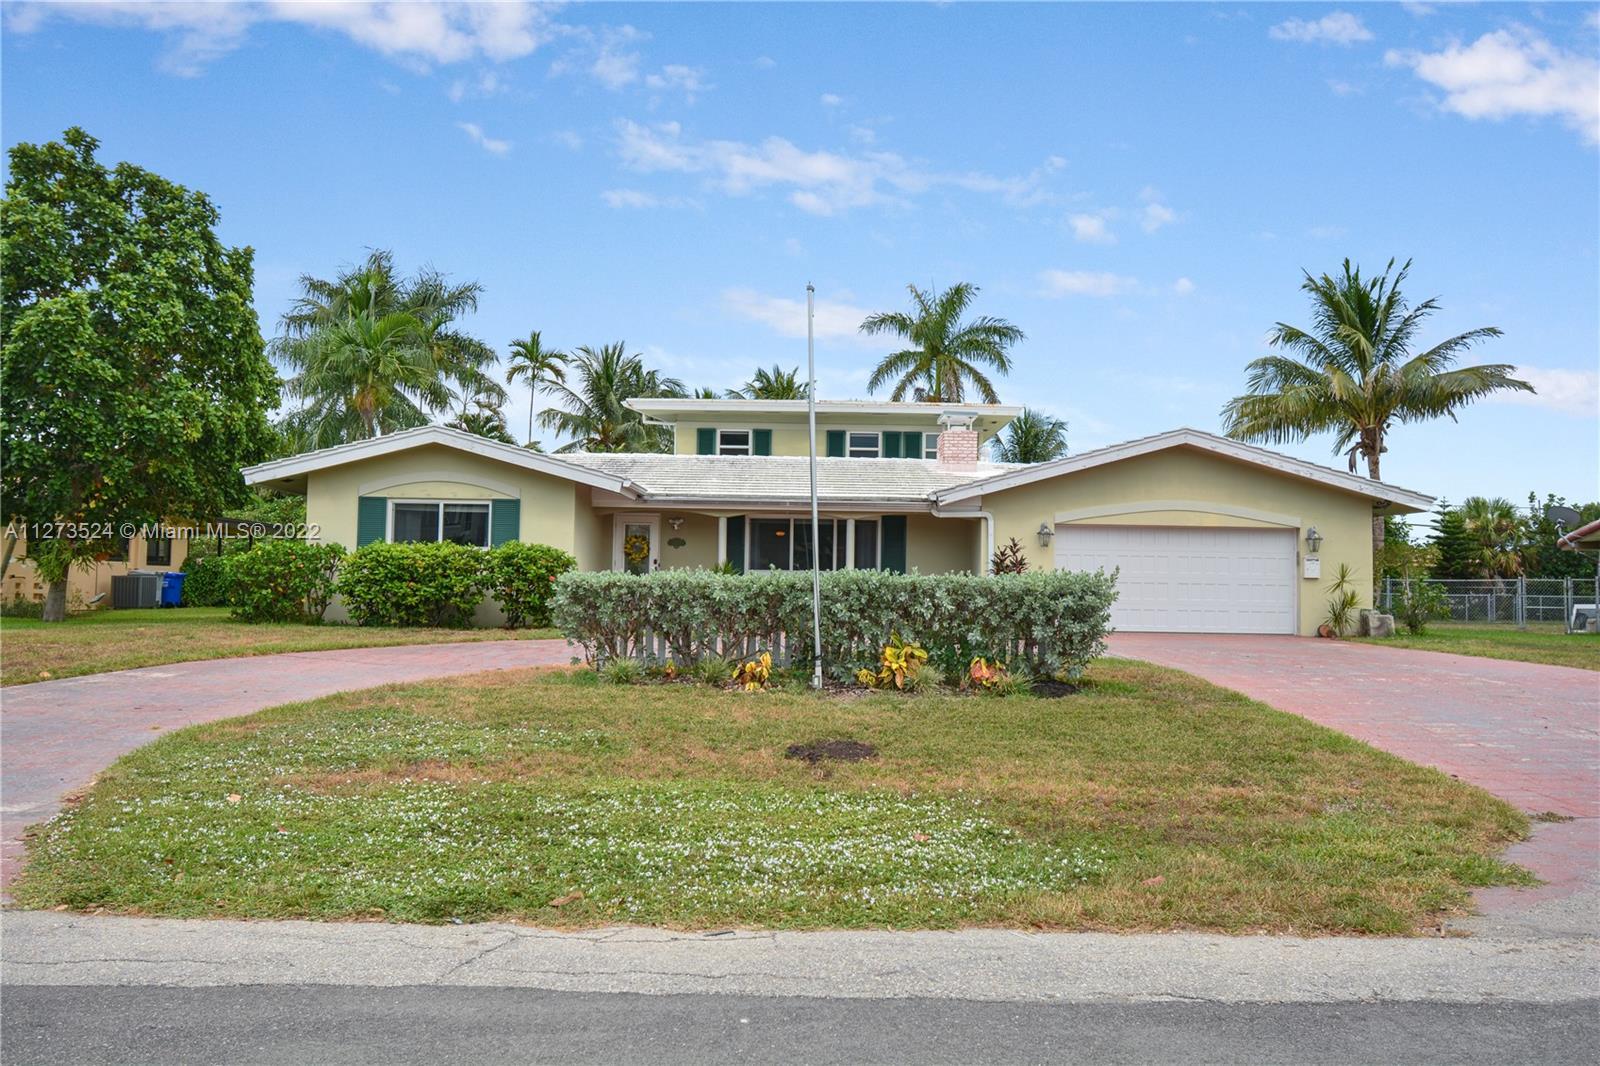 Located just a few streets south of Lighthouse Point, this home is in the heart of everything. Walk 